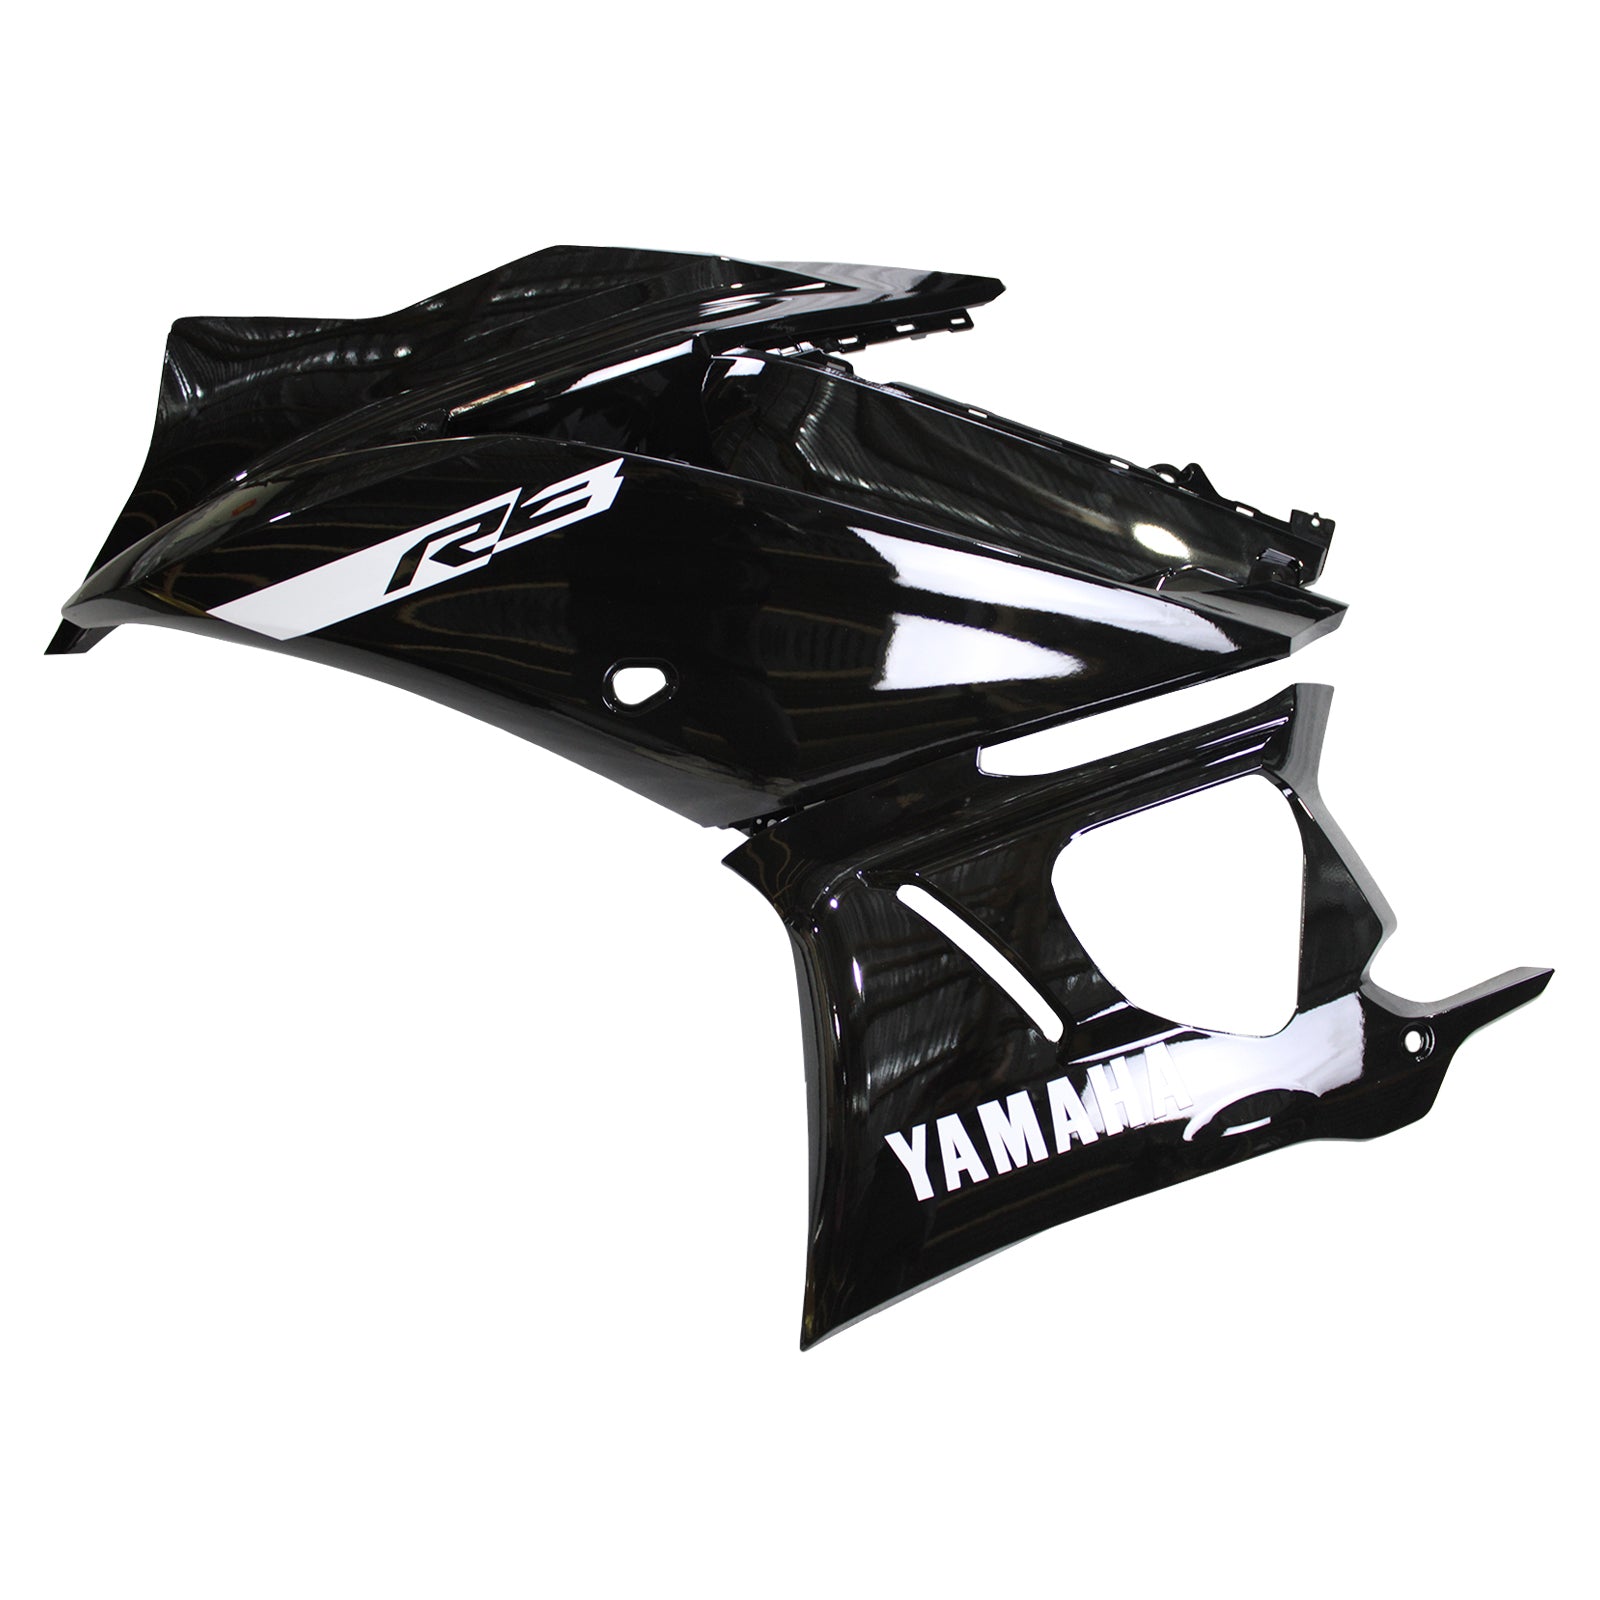 Amotopart 2022-2024 Yamaha YZF-R3 R25 Black with White Accents Fairing Kit